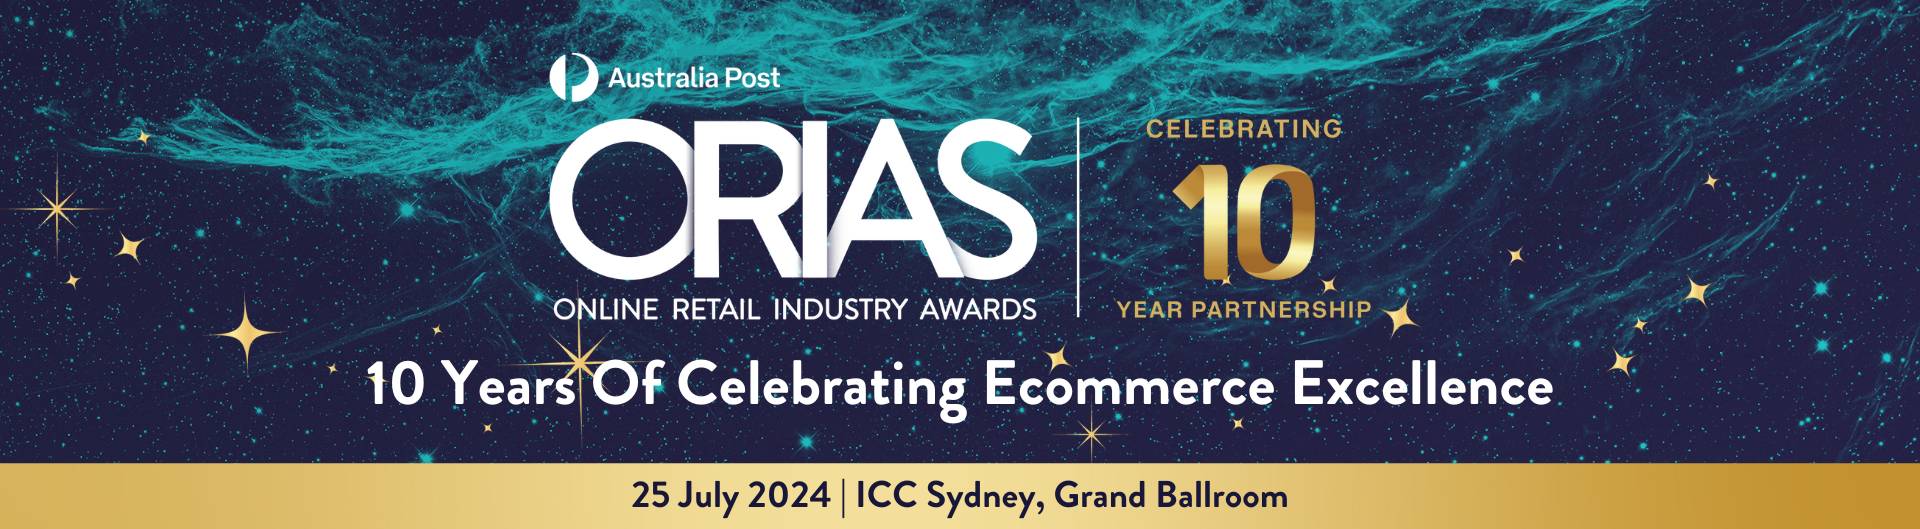 Online Retail Industry Awards is coming to ICC Sydney on 24 to 25 July.